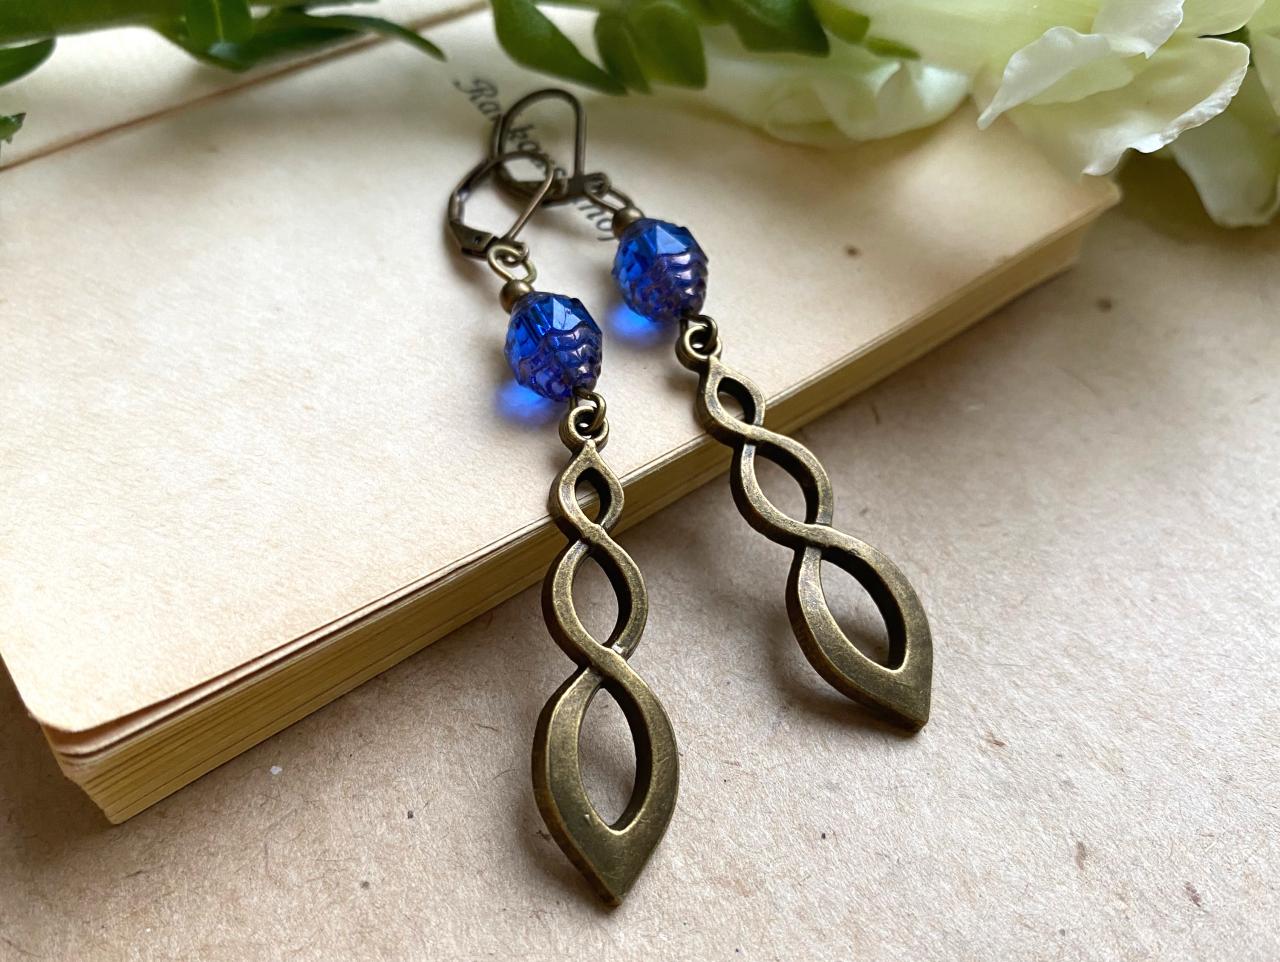 Elegant Art Nouveau Earrings With Blue Faceted Glass Beads, Selma Dreams